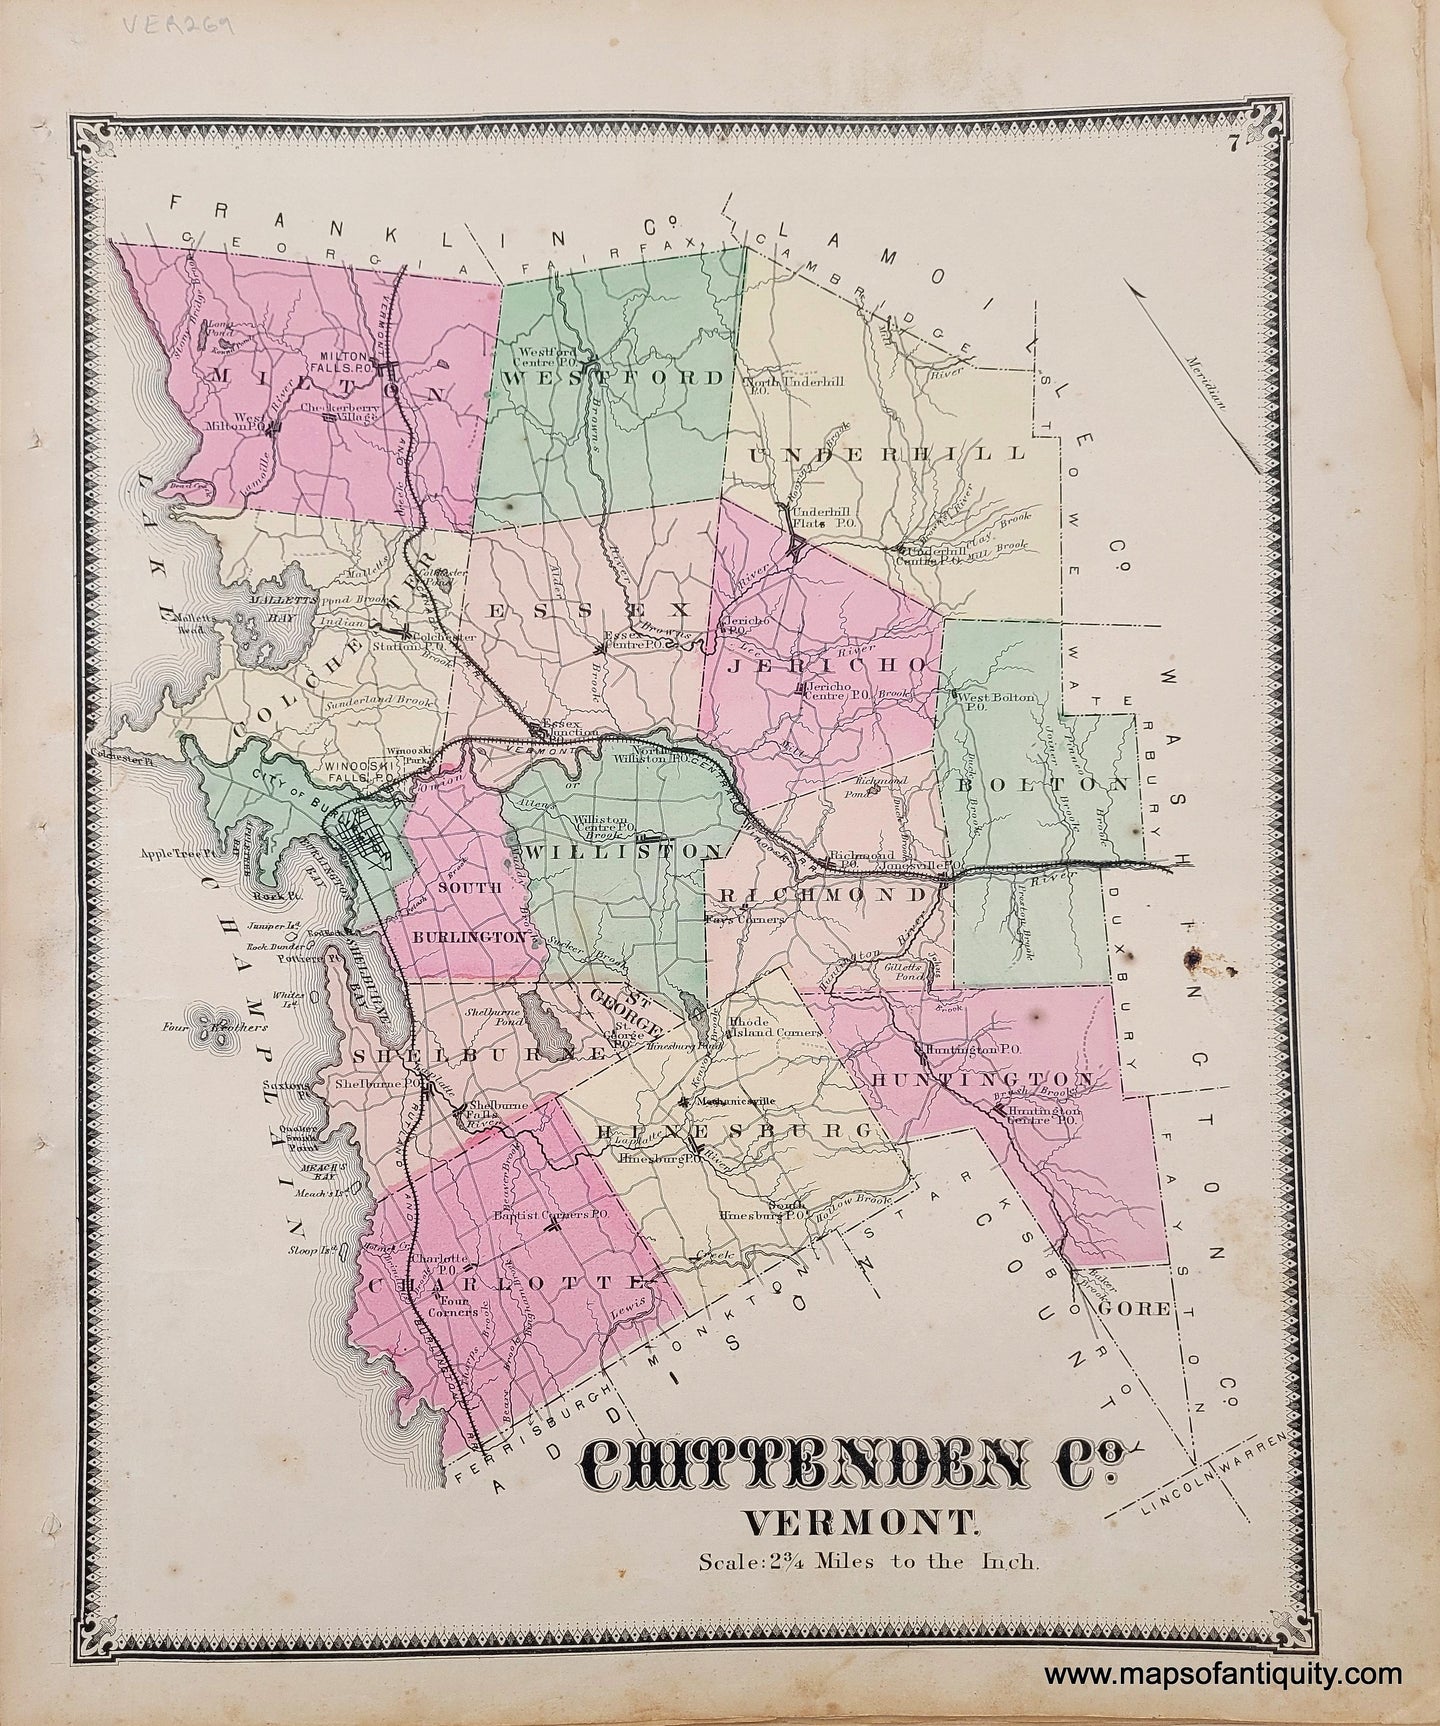 Genuine-Antique-Hand-colored-Map-Chittenden-Co.-Vermont-1869-Beers-Ellis-Soule-Maps-Of-Antiquity